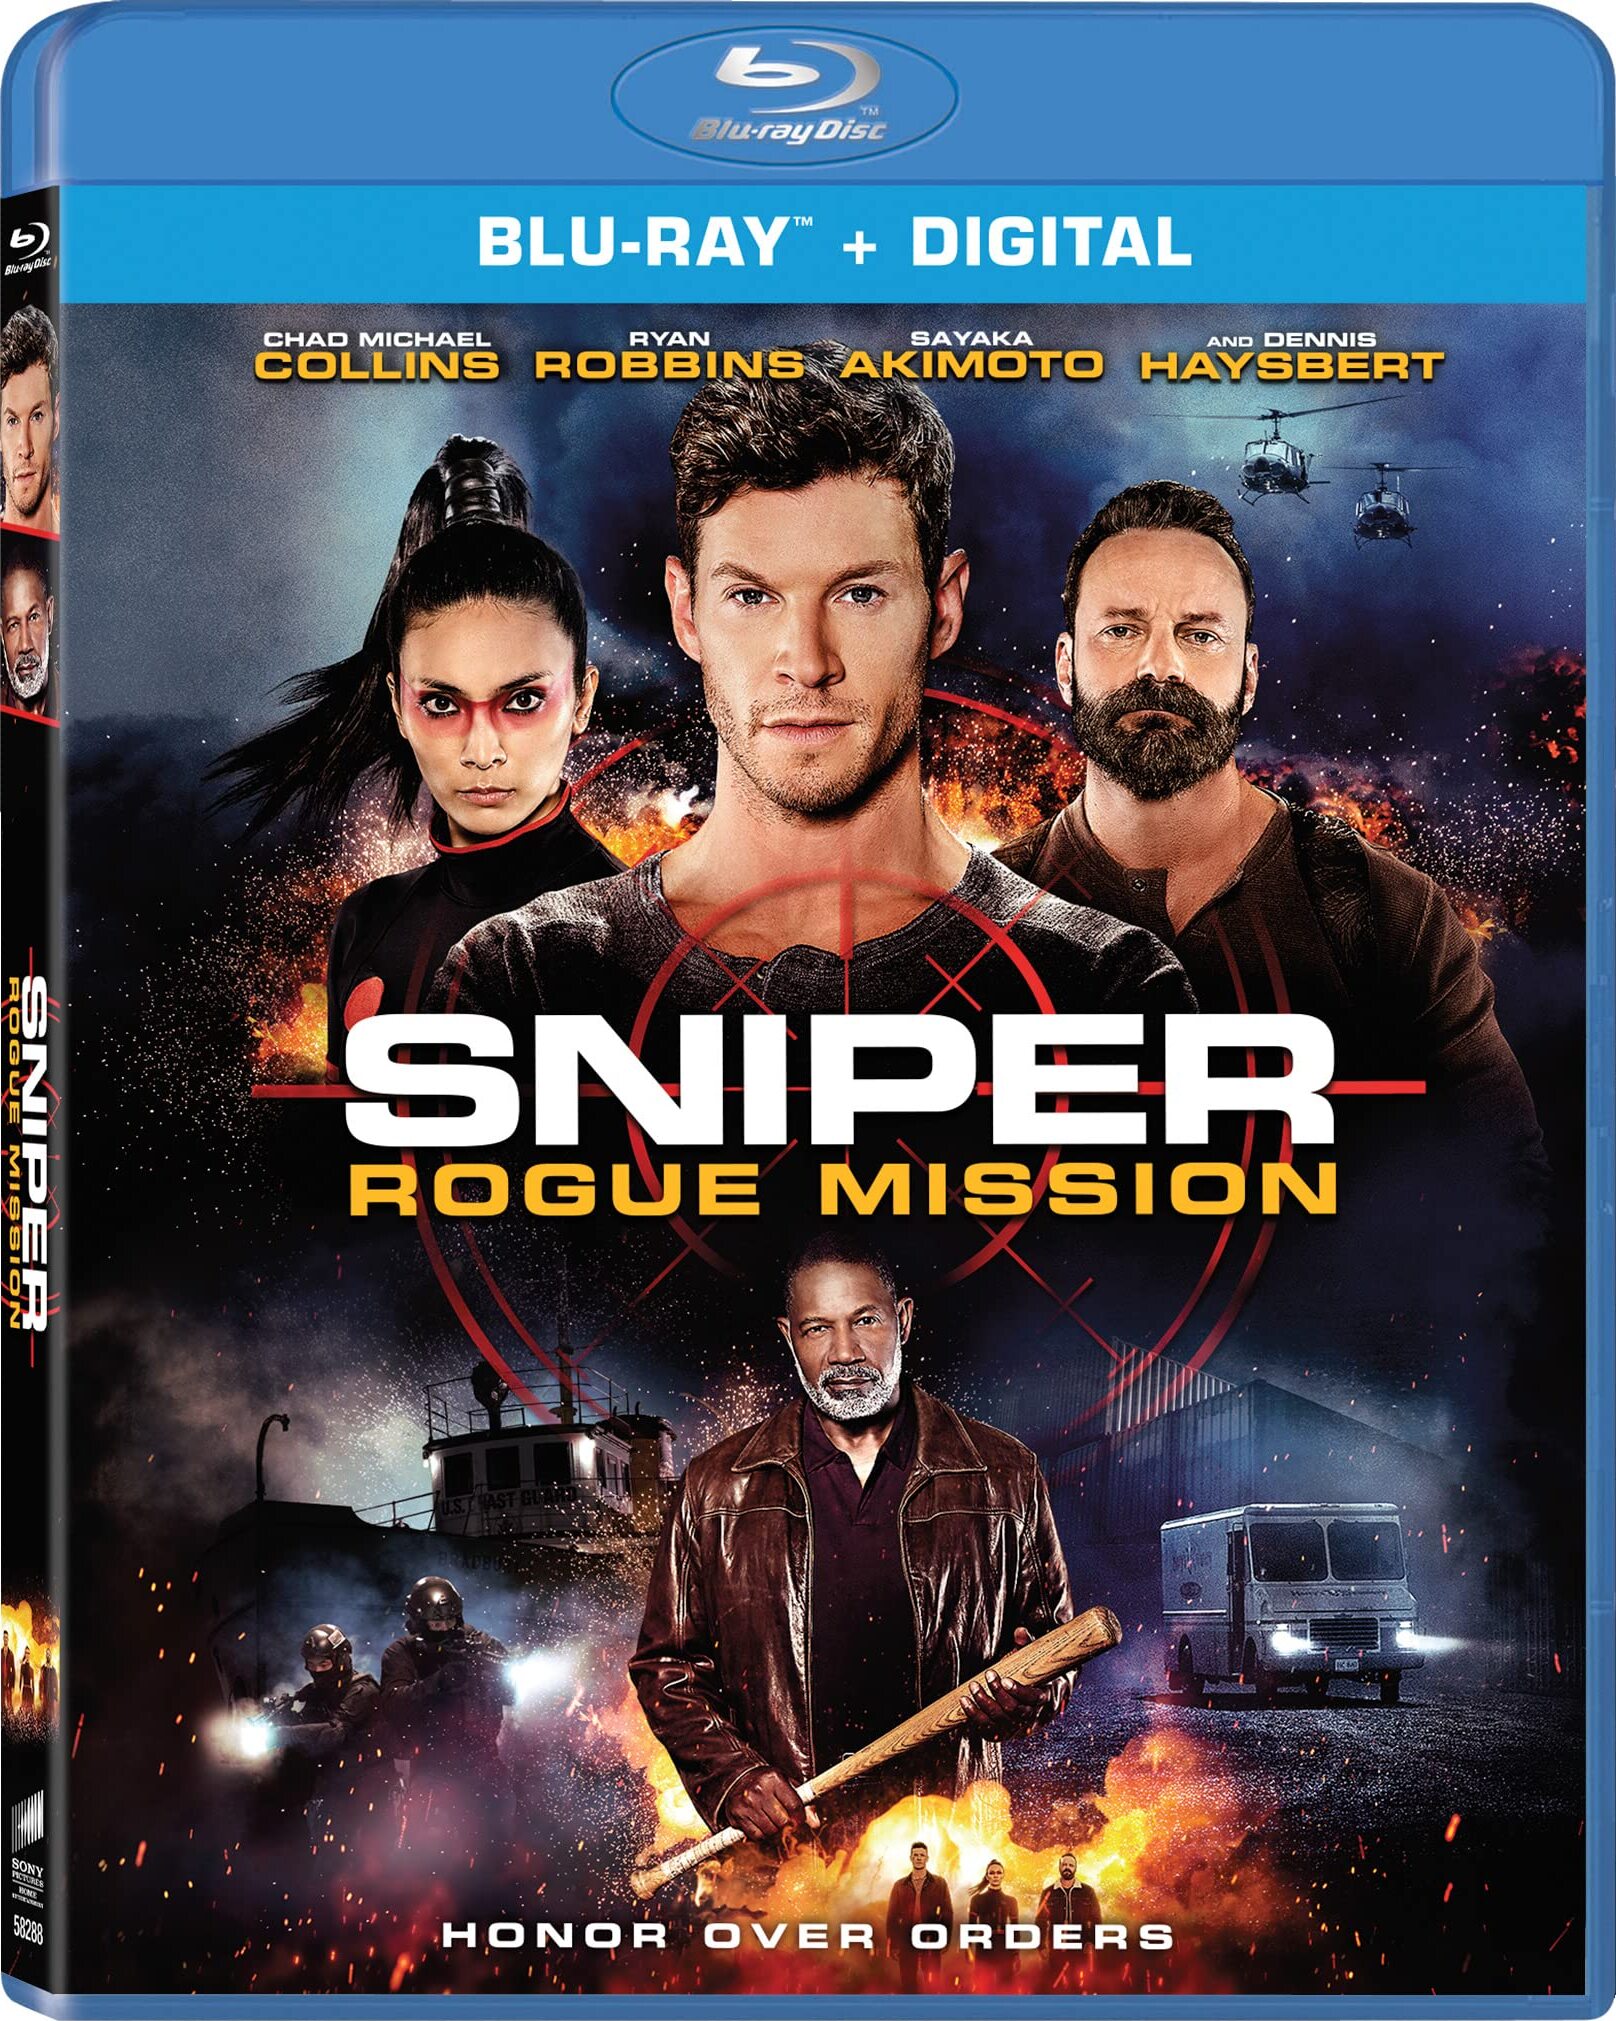 Sniper: Rogue Mission (2022) English BluRay x264 AAC 1080p 720p Download